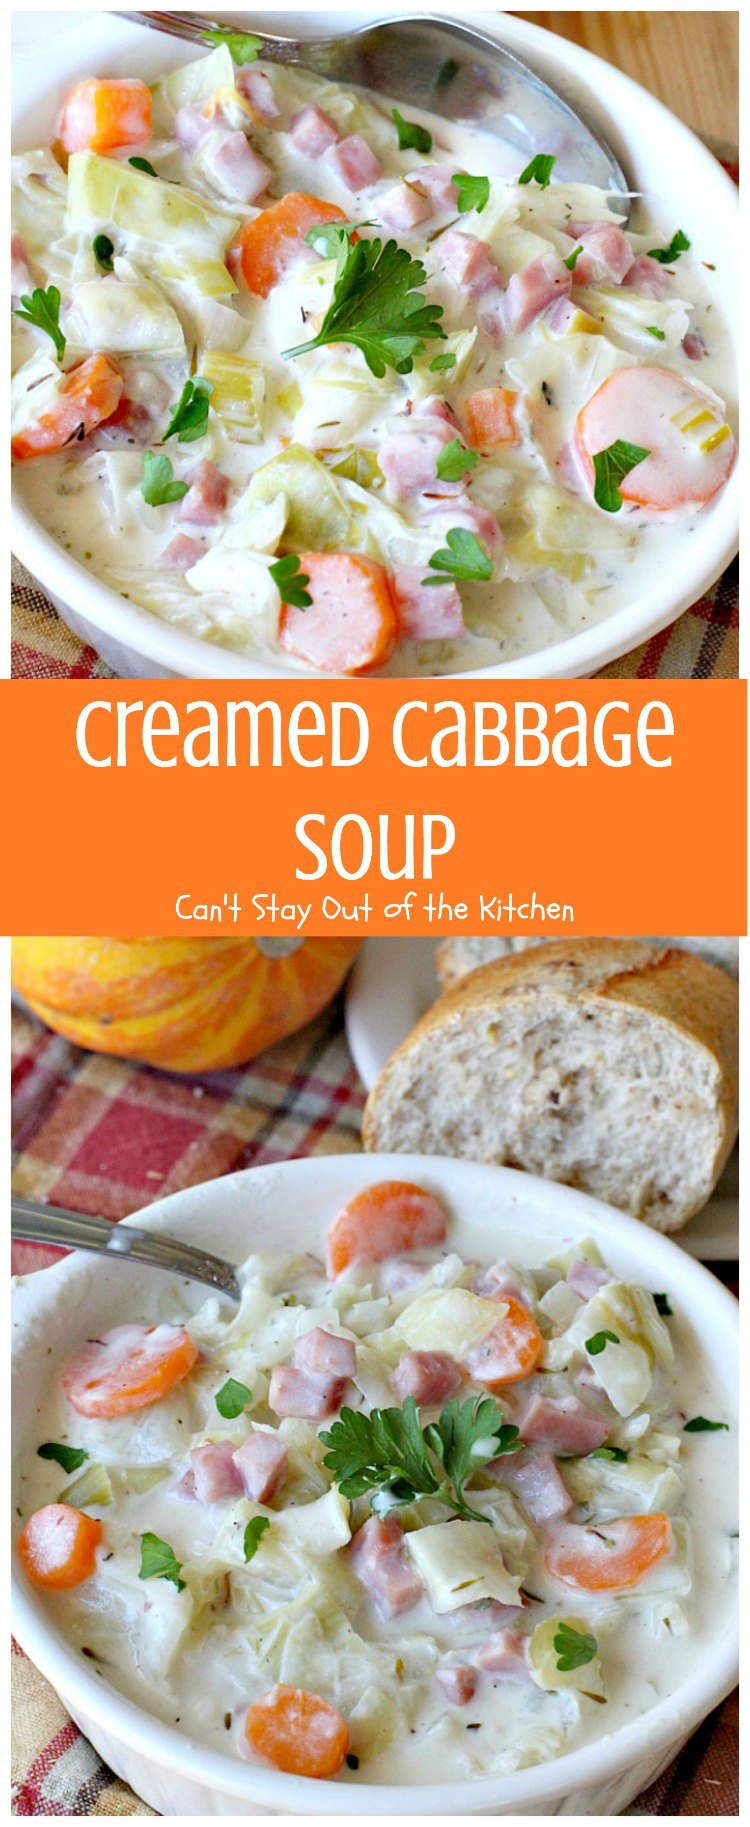 Creamed Cabbage Soup | Can't Stay Out of the Kitchen